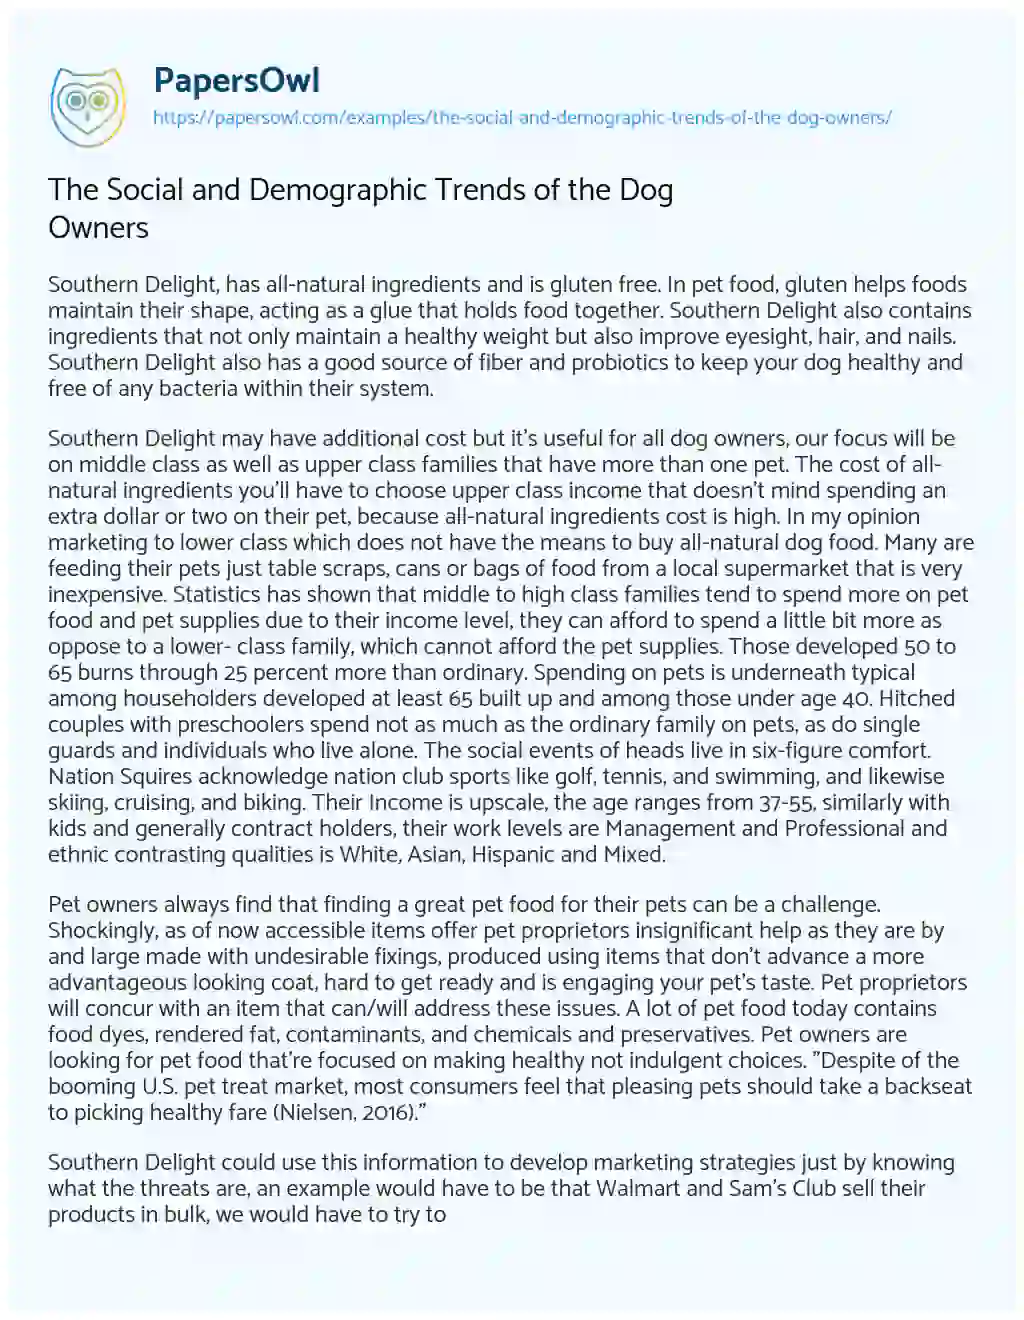 Essay on The Social and Demographic Trends of the Dog Owners